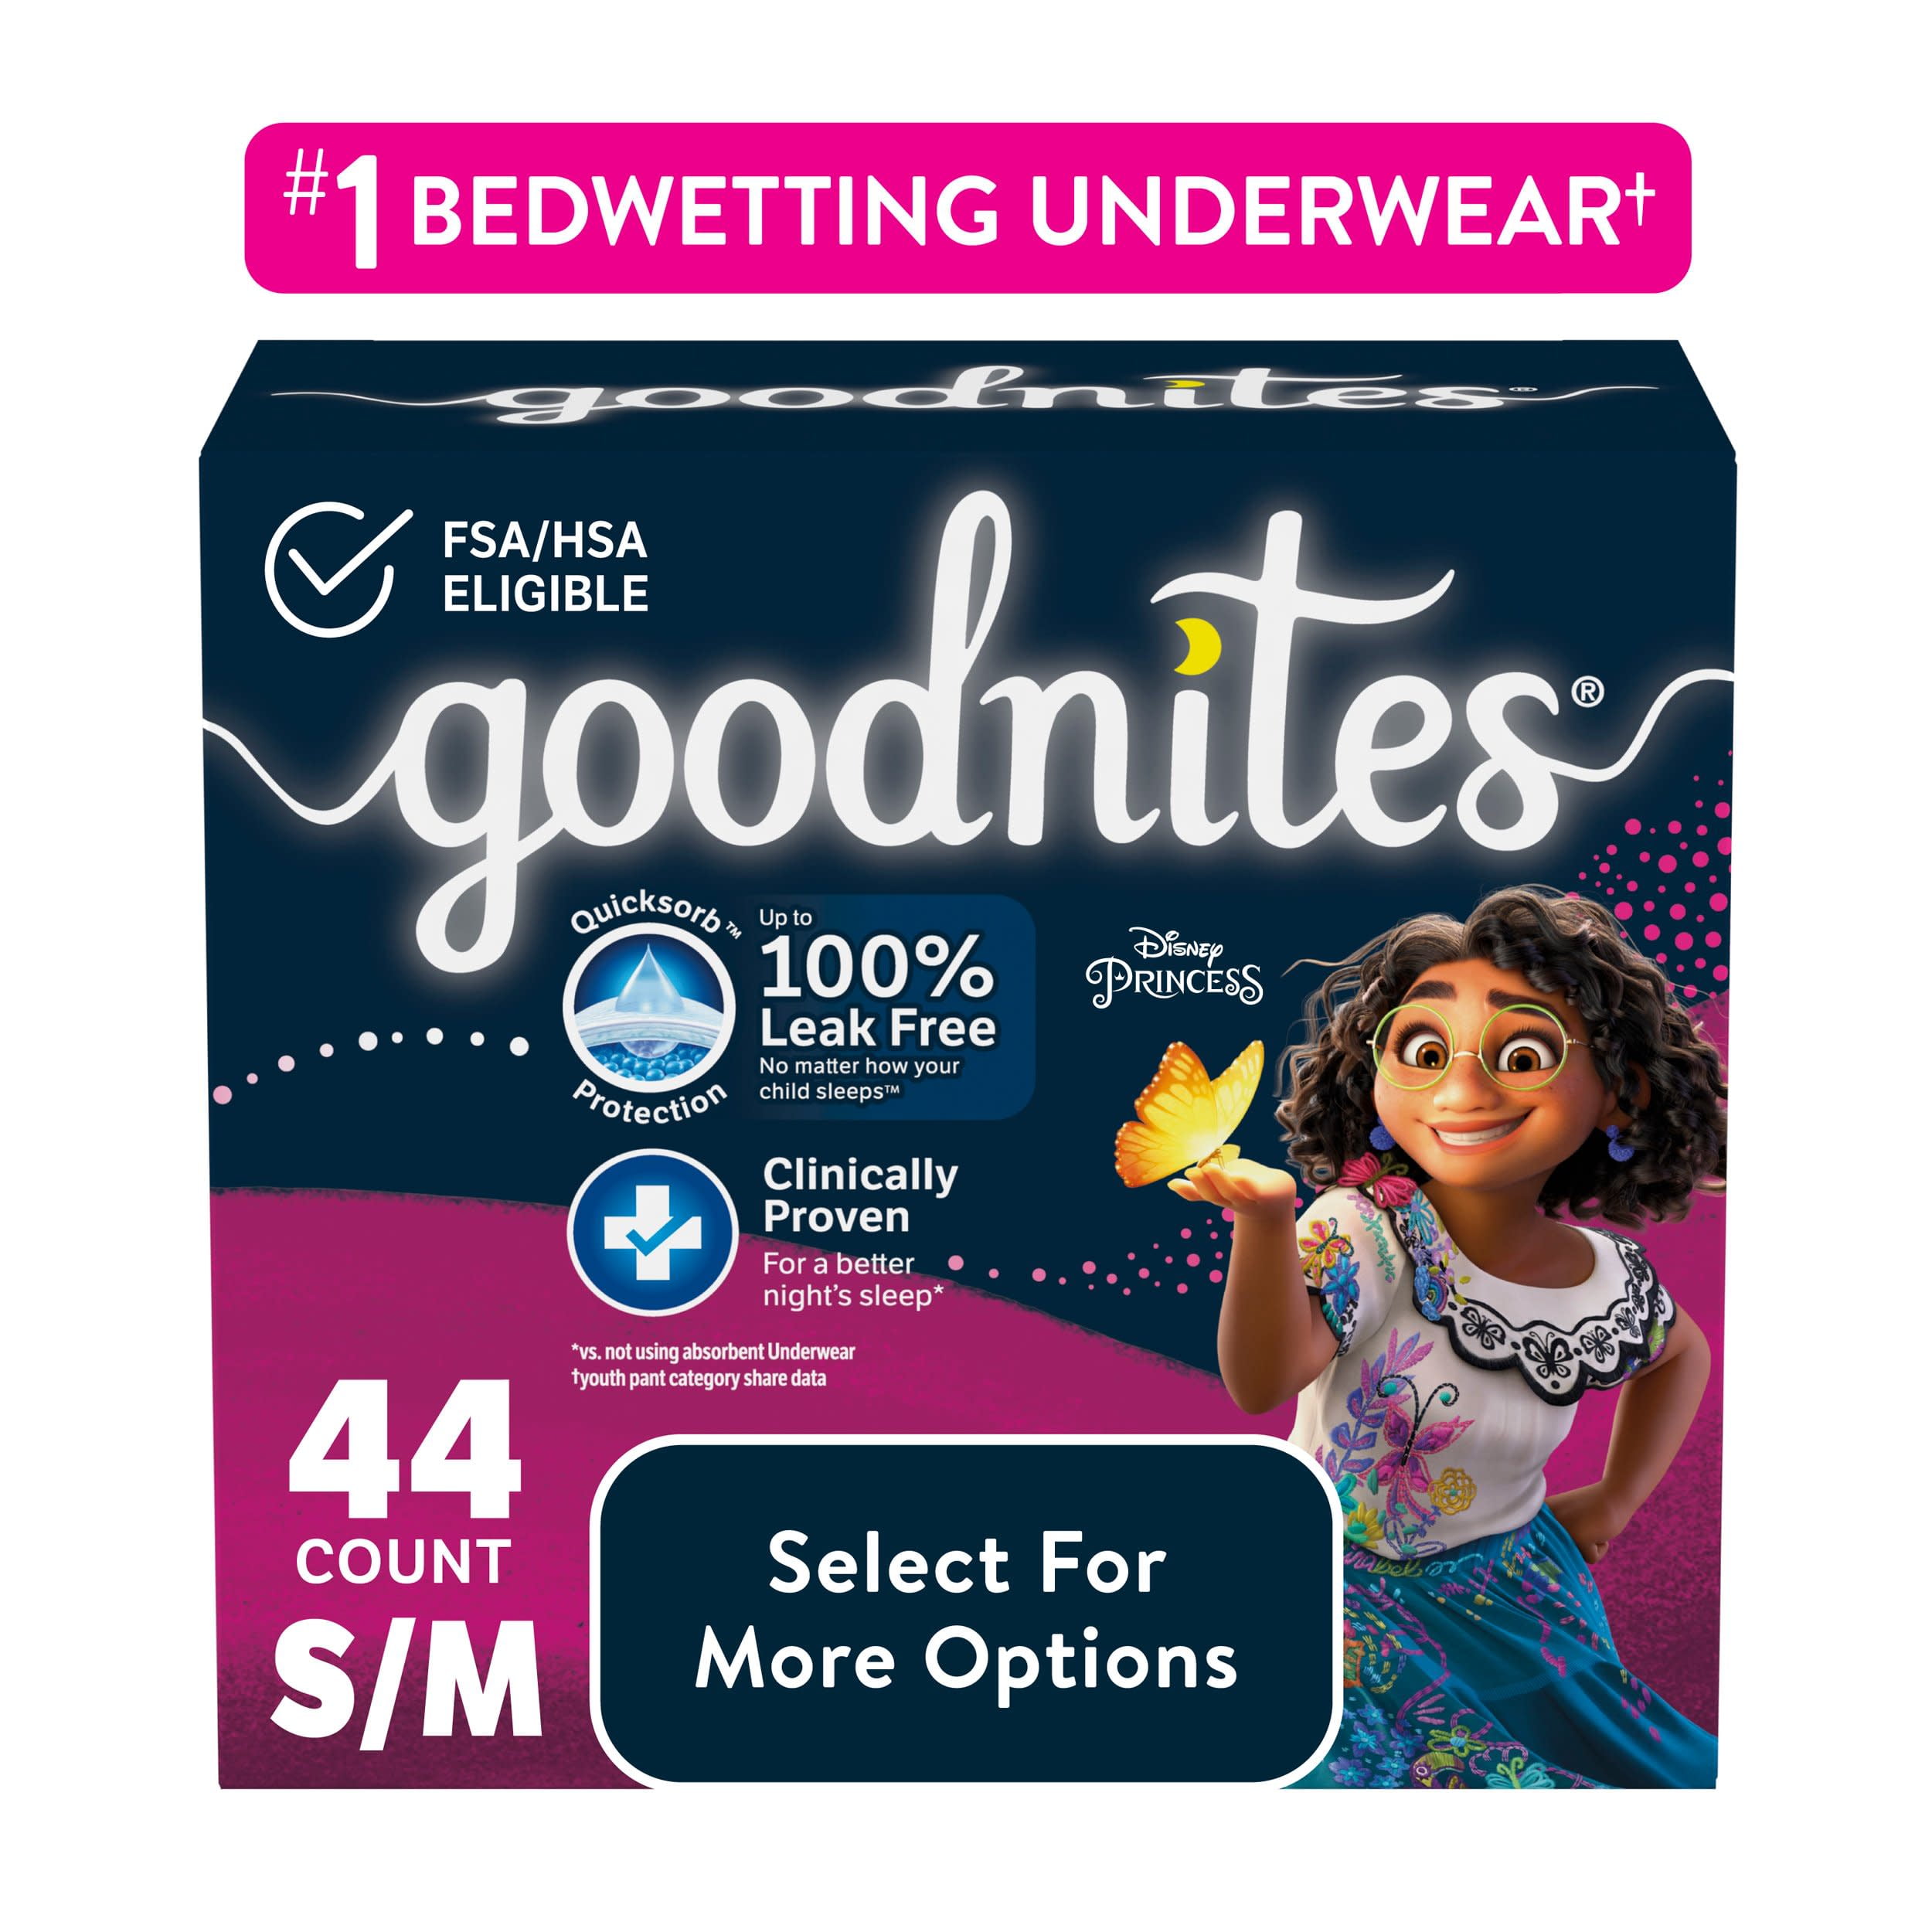 Goodnites Nighttime Bedwetting Underwear for Boys, XL, 63 Ct (Select for  More Options)